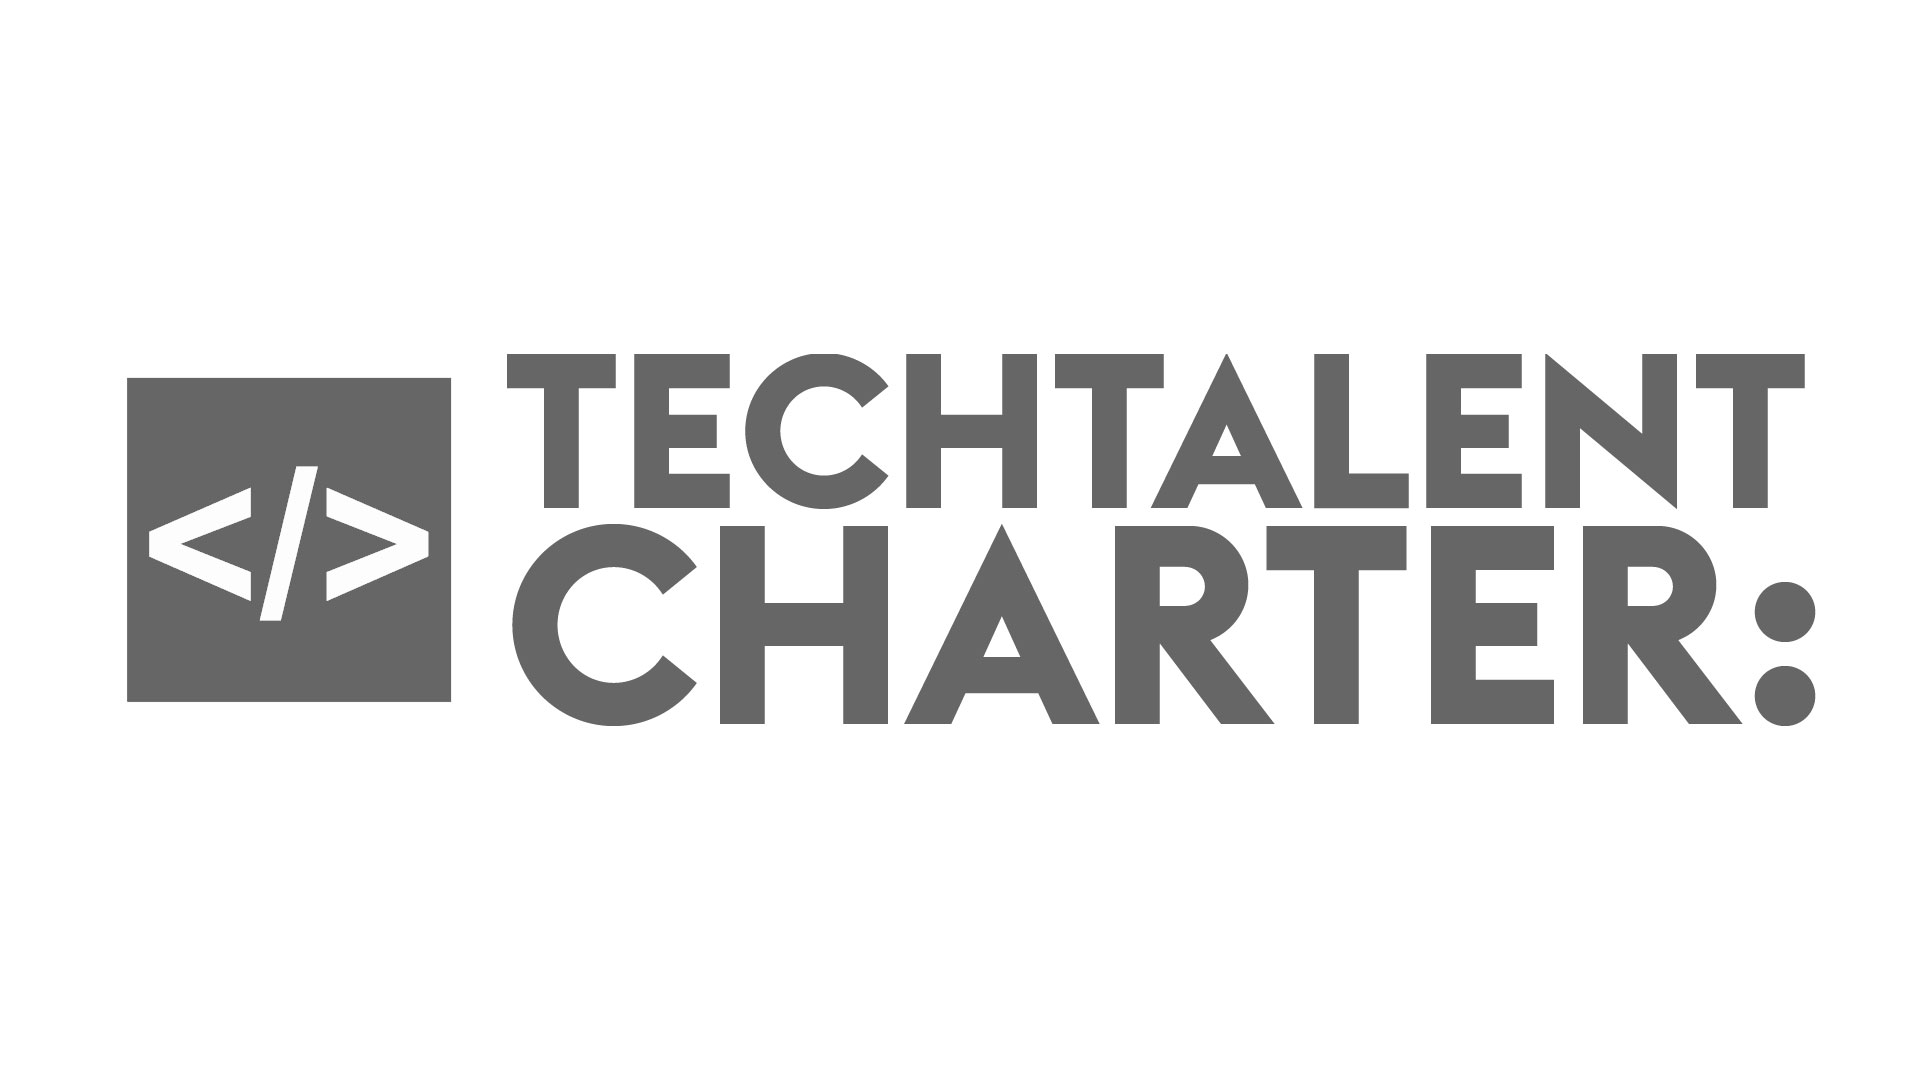 Tech Talent Charter devise 2020 plan to make the tech industry more inclusive